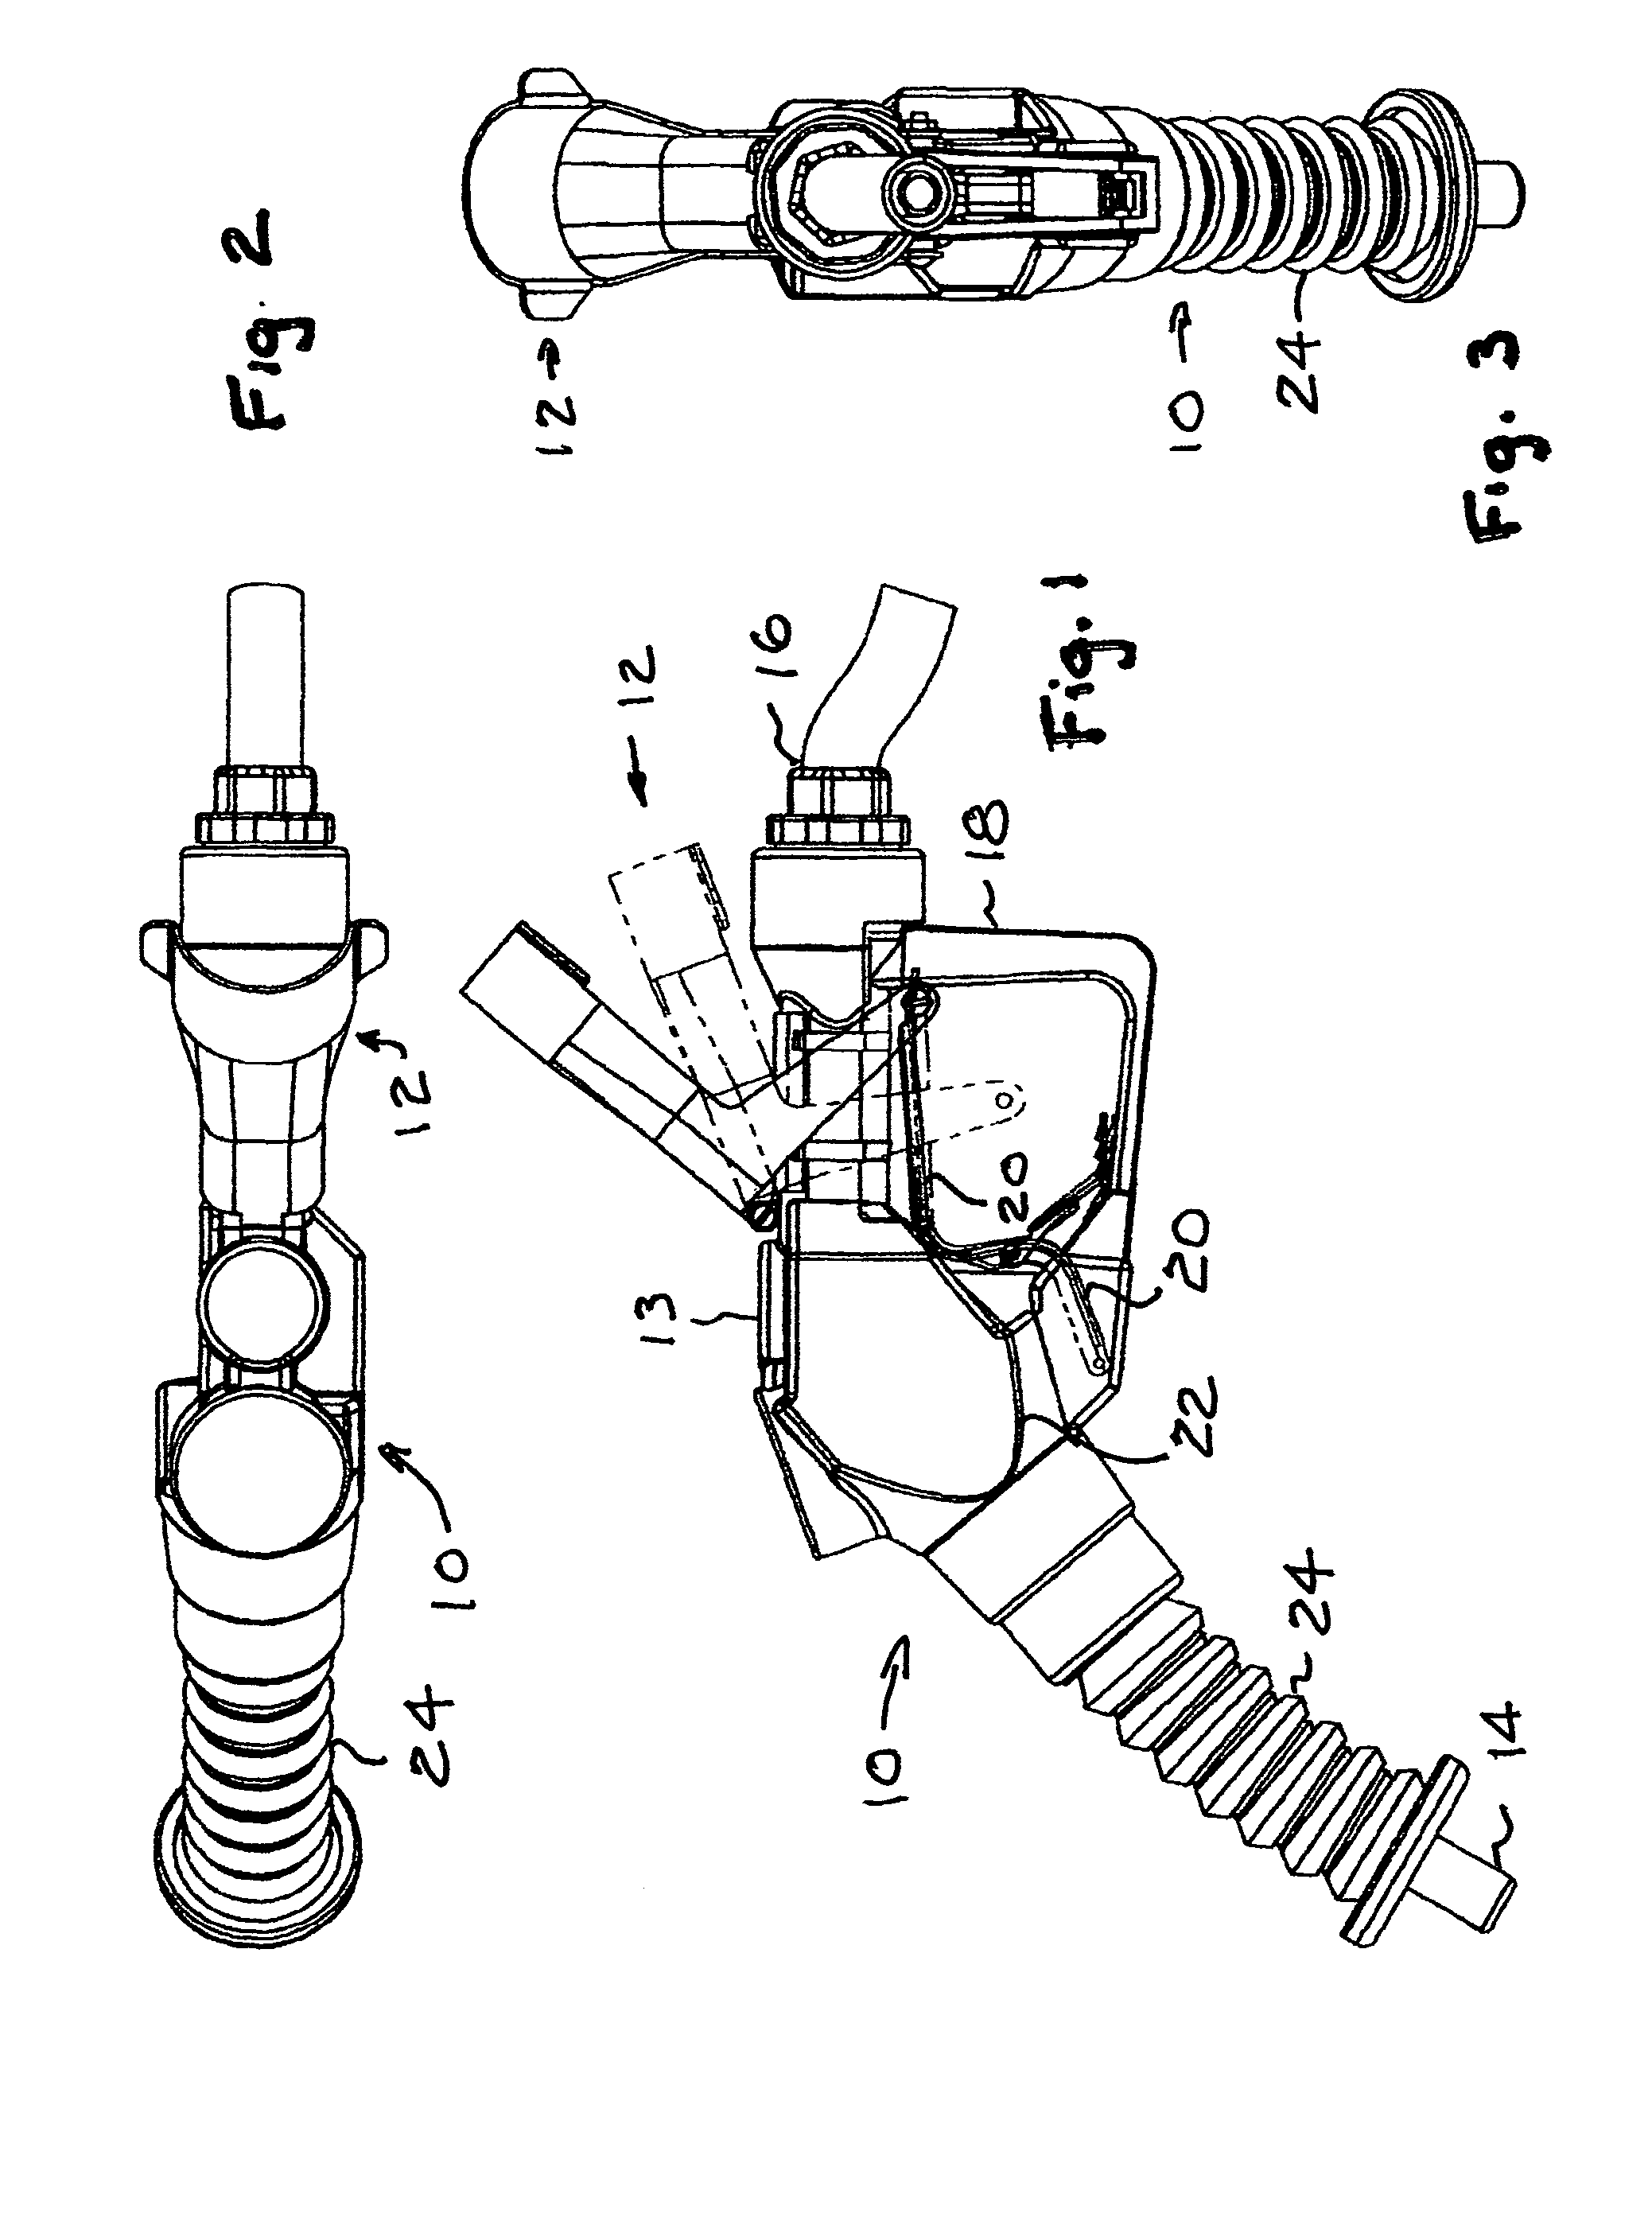 Fluid nozzle and adapter for existing fluid nozzles